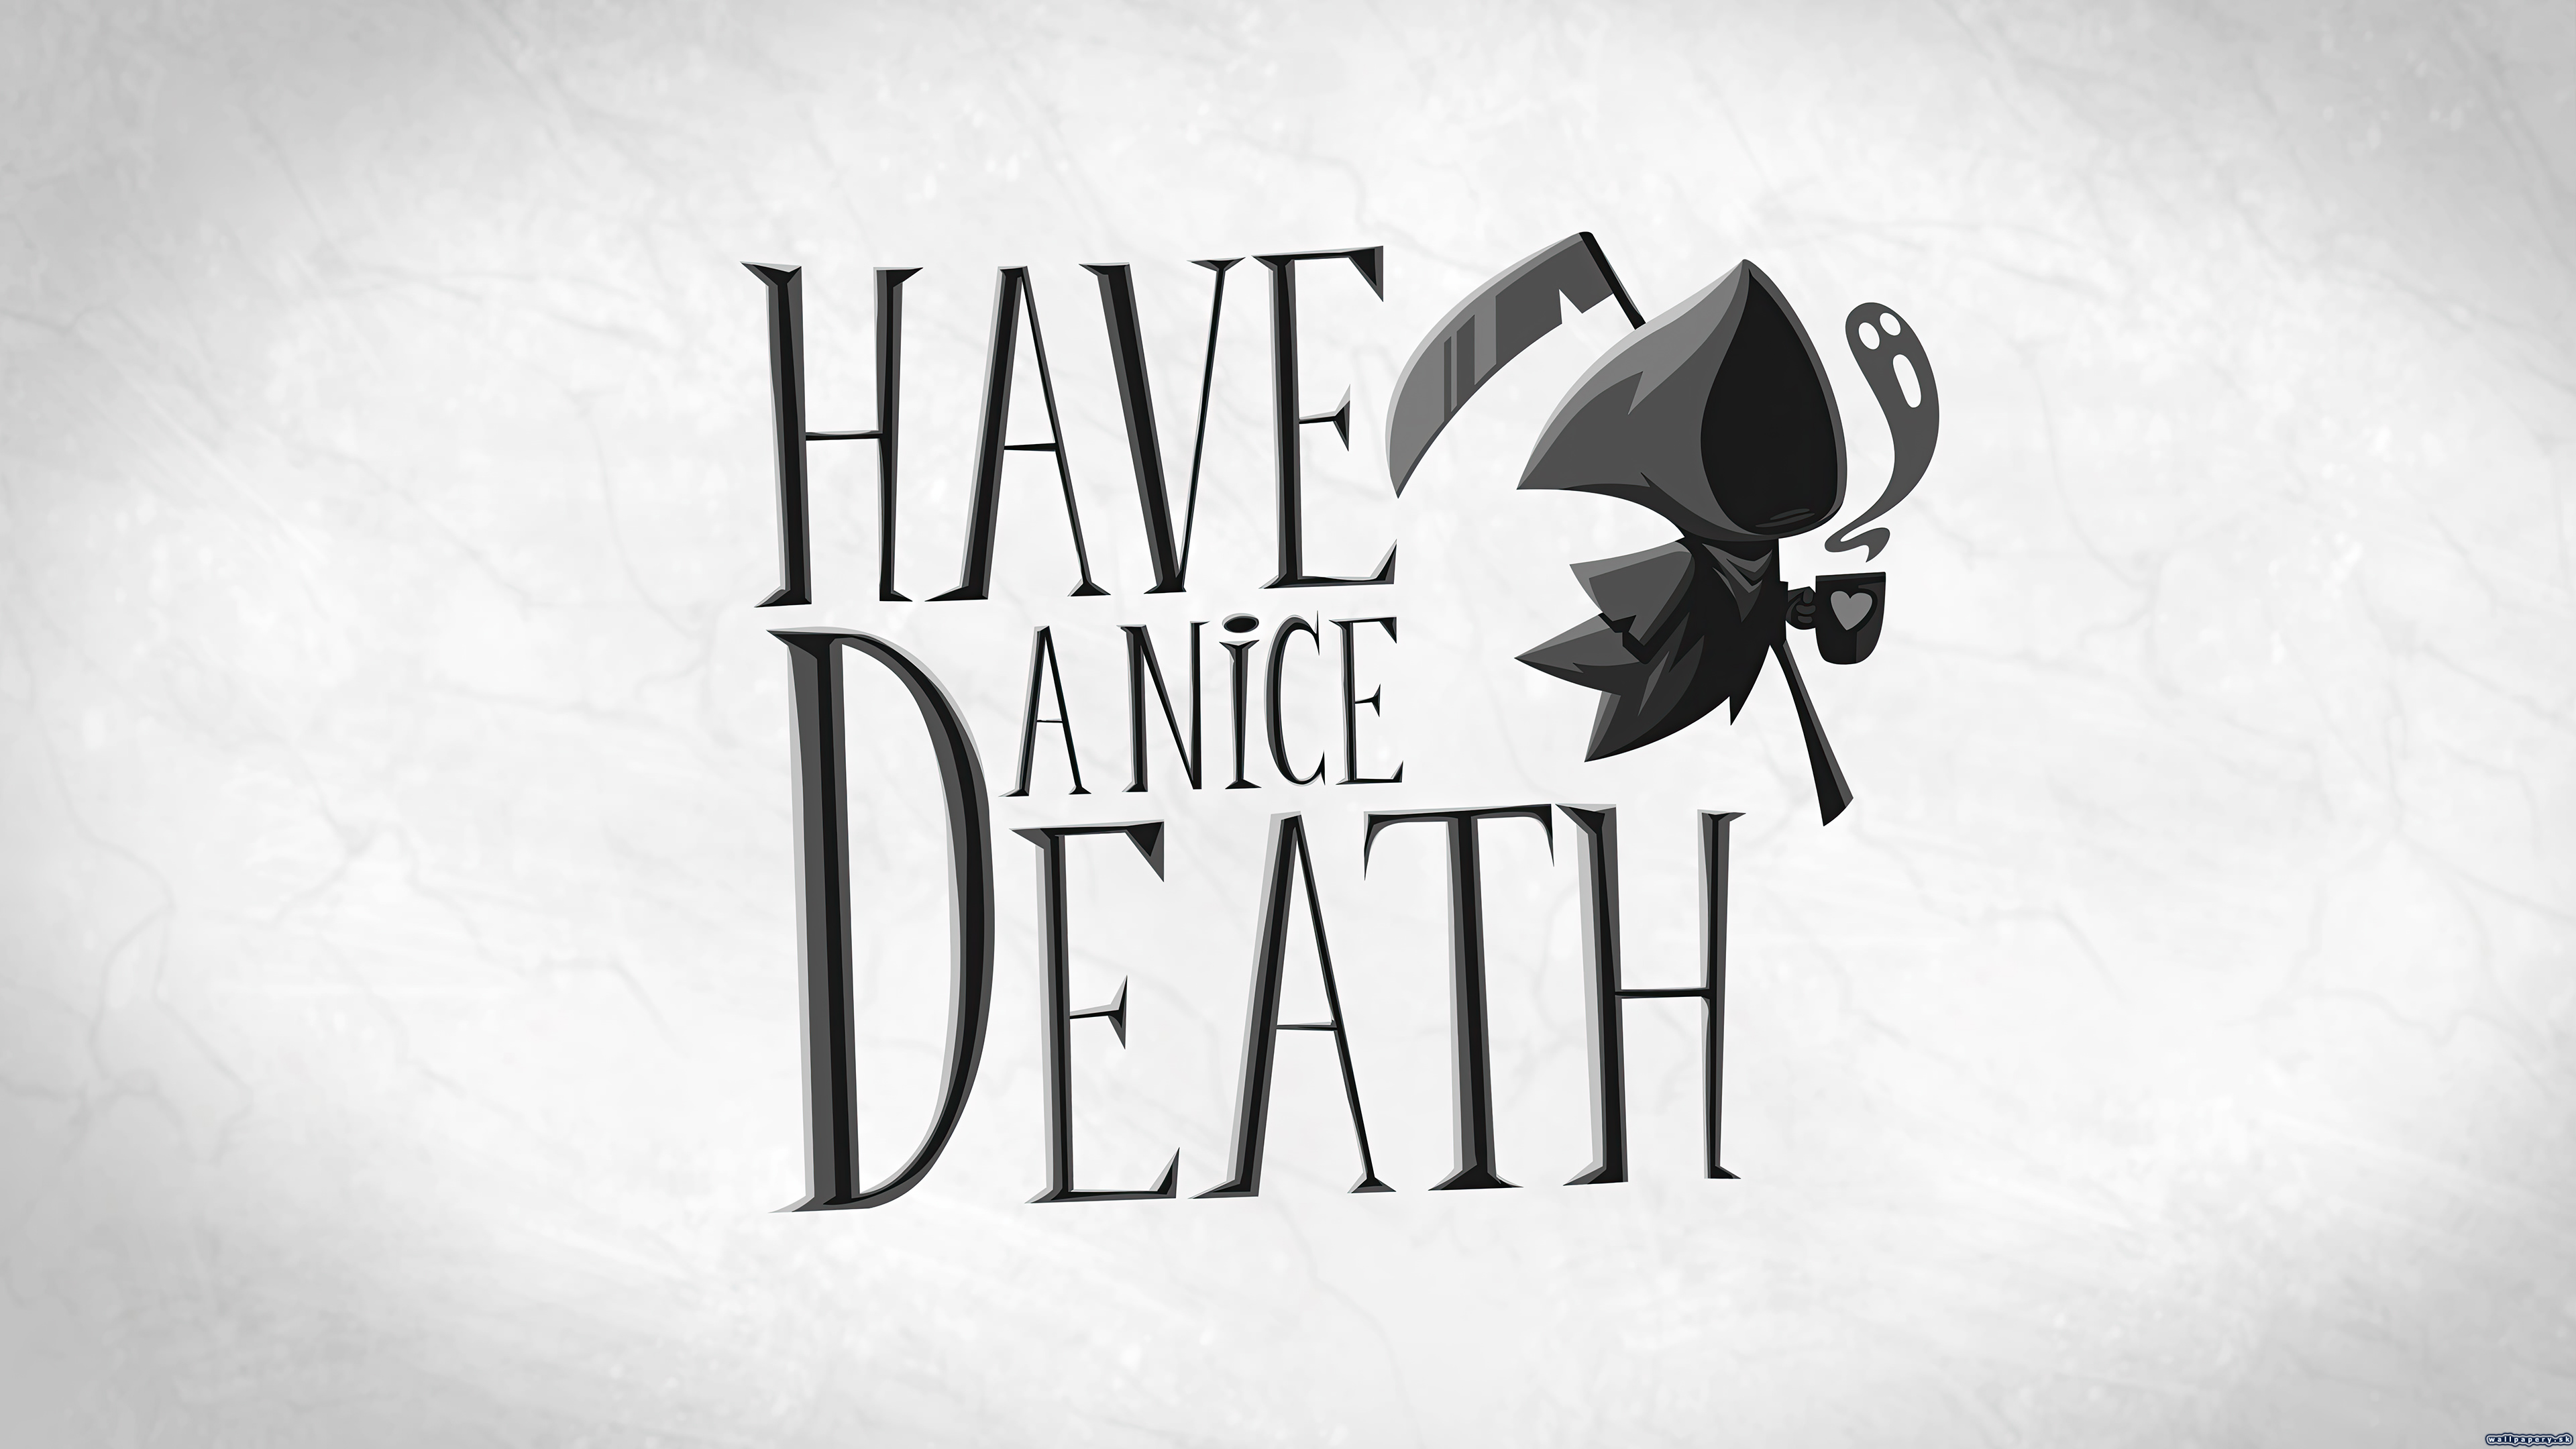 Have a Nice Death - wallpaper 6